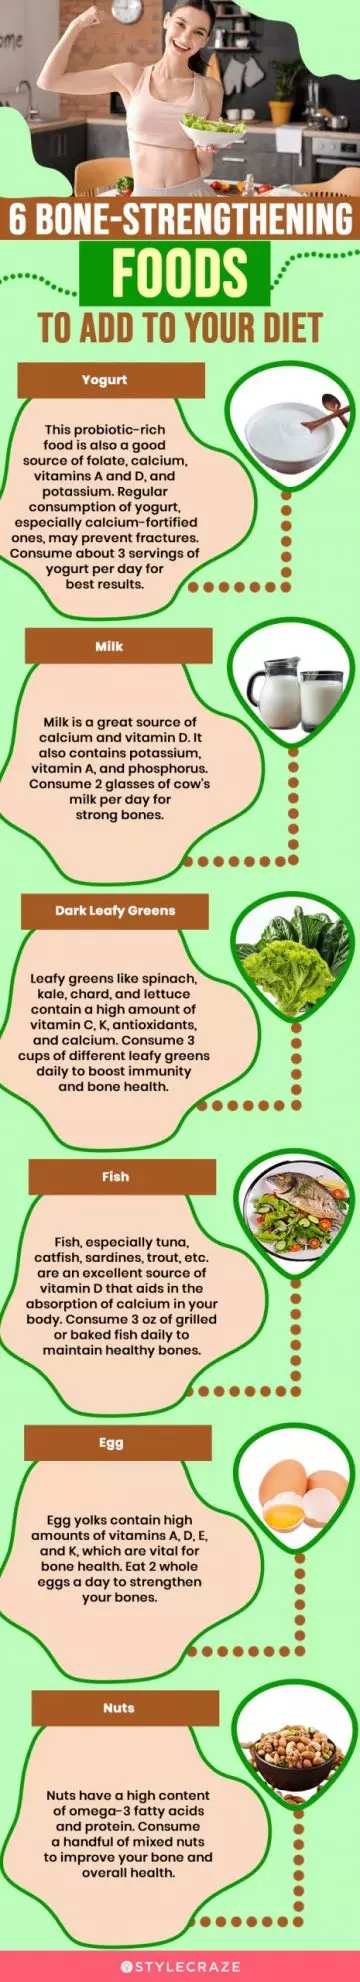 6 bone strengthening foods to add to your diet (infographic)